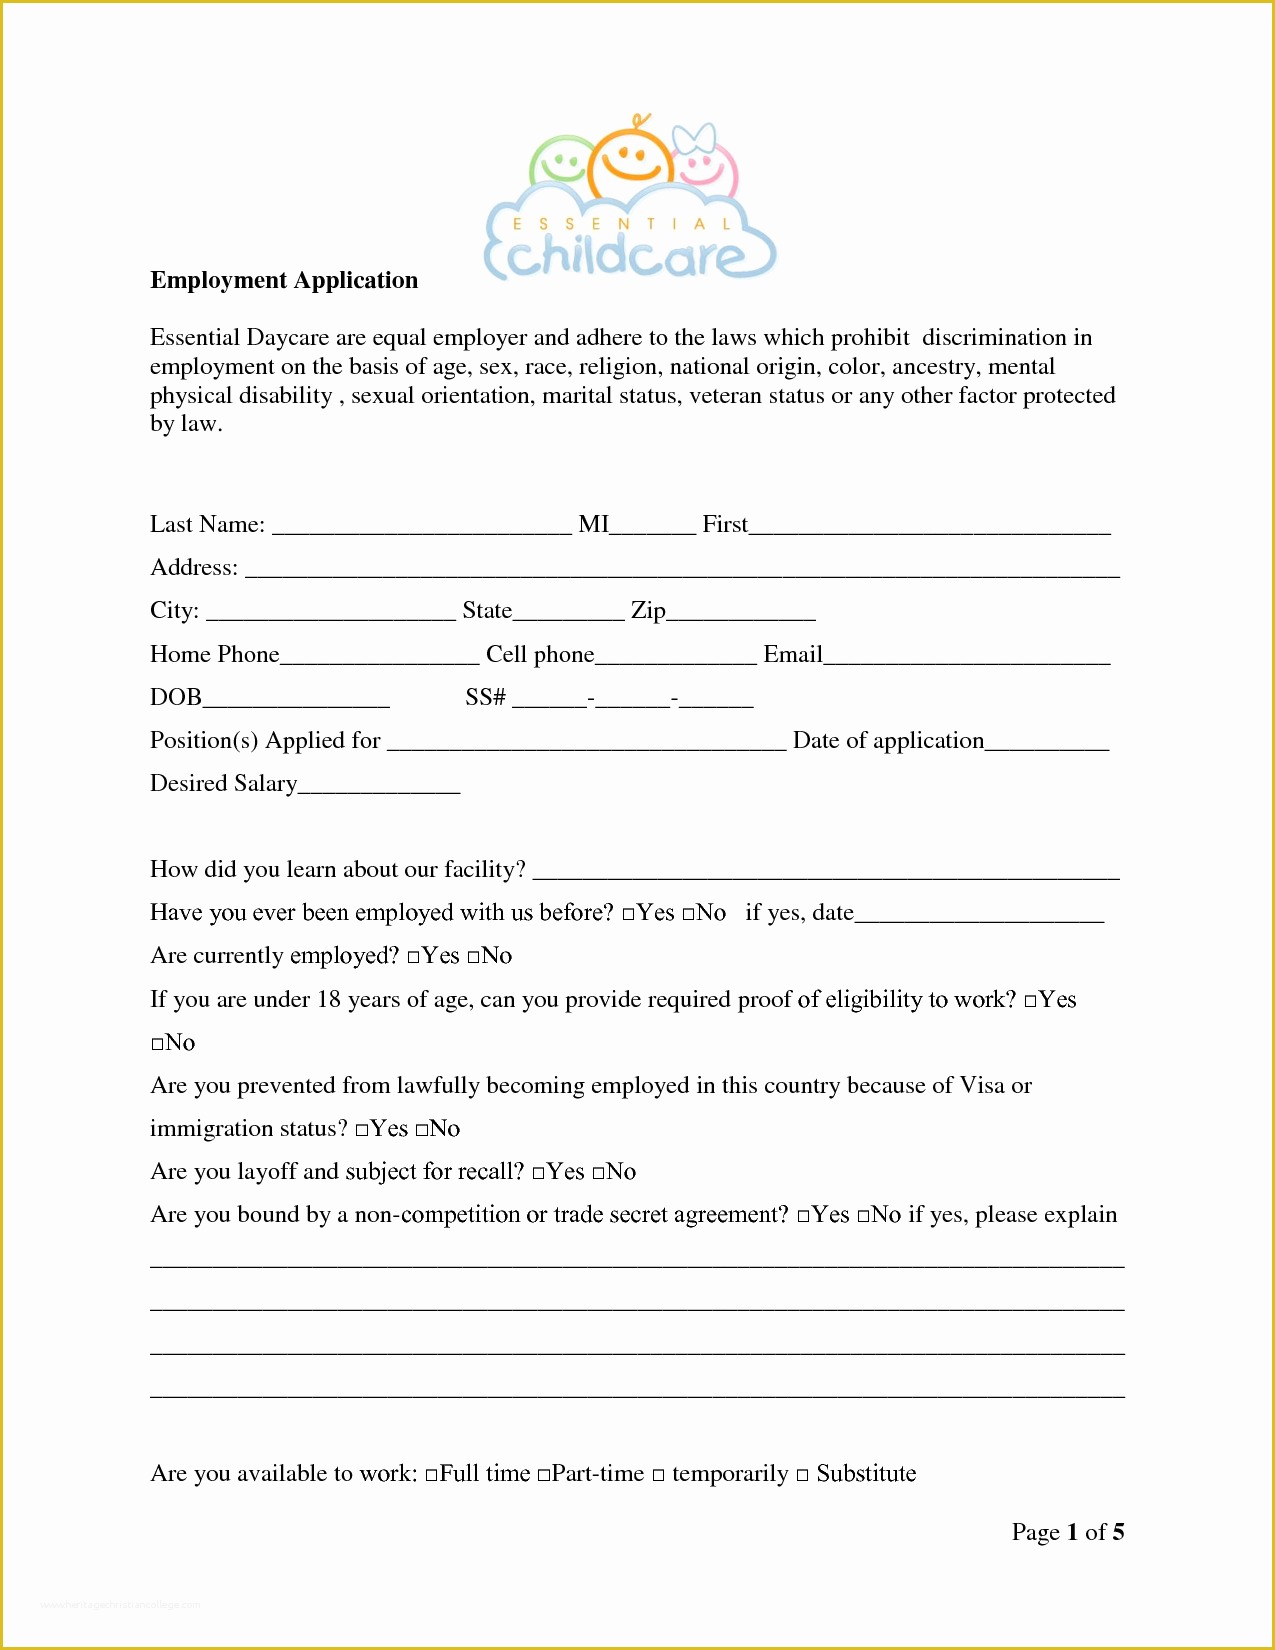 Free Salon Application Template Of Daycare Center Employment Application Bing